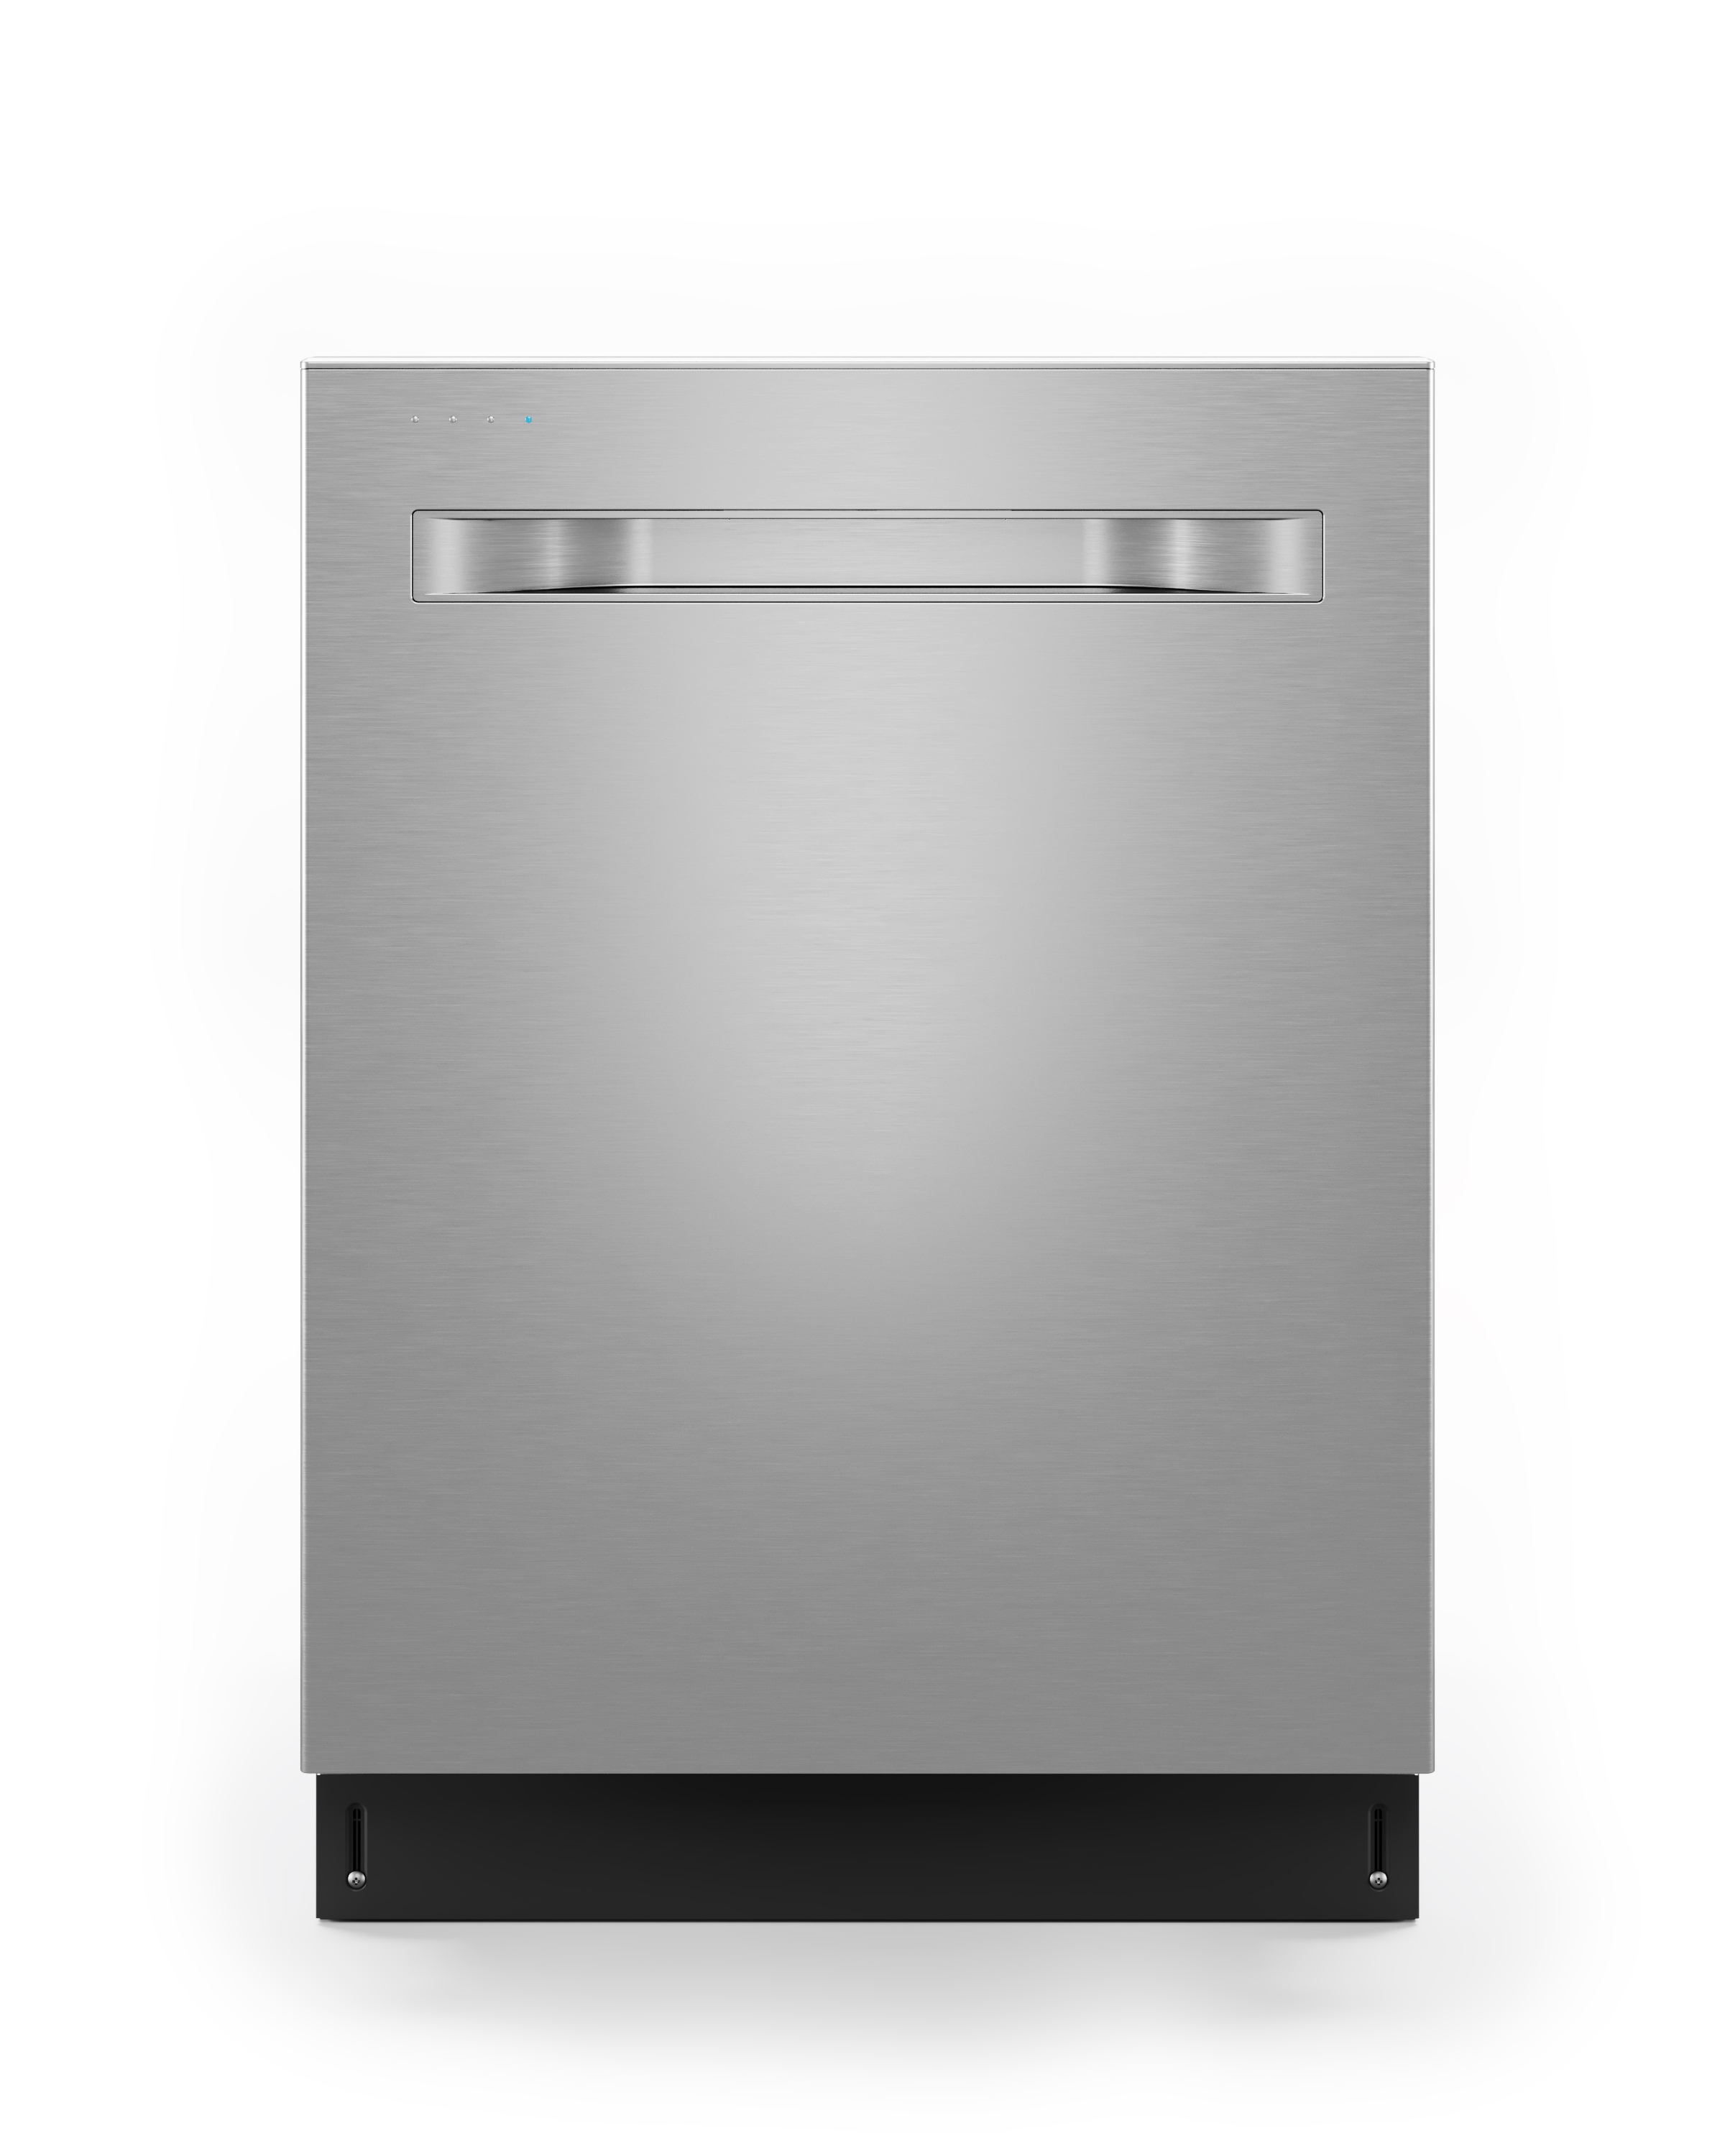 Midea Smart 45 dBA Top Control 24-in Built-In Dishwasher (Stainless Steel) ENERGY STAR